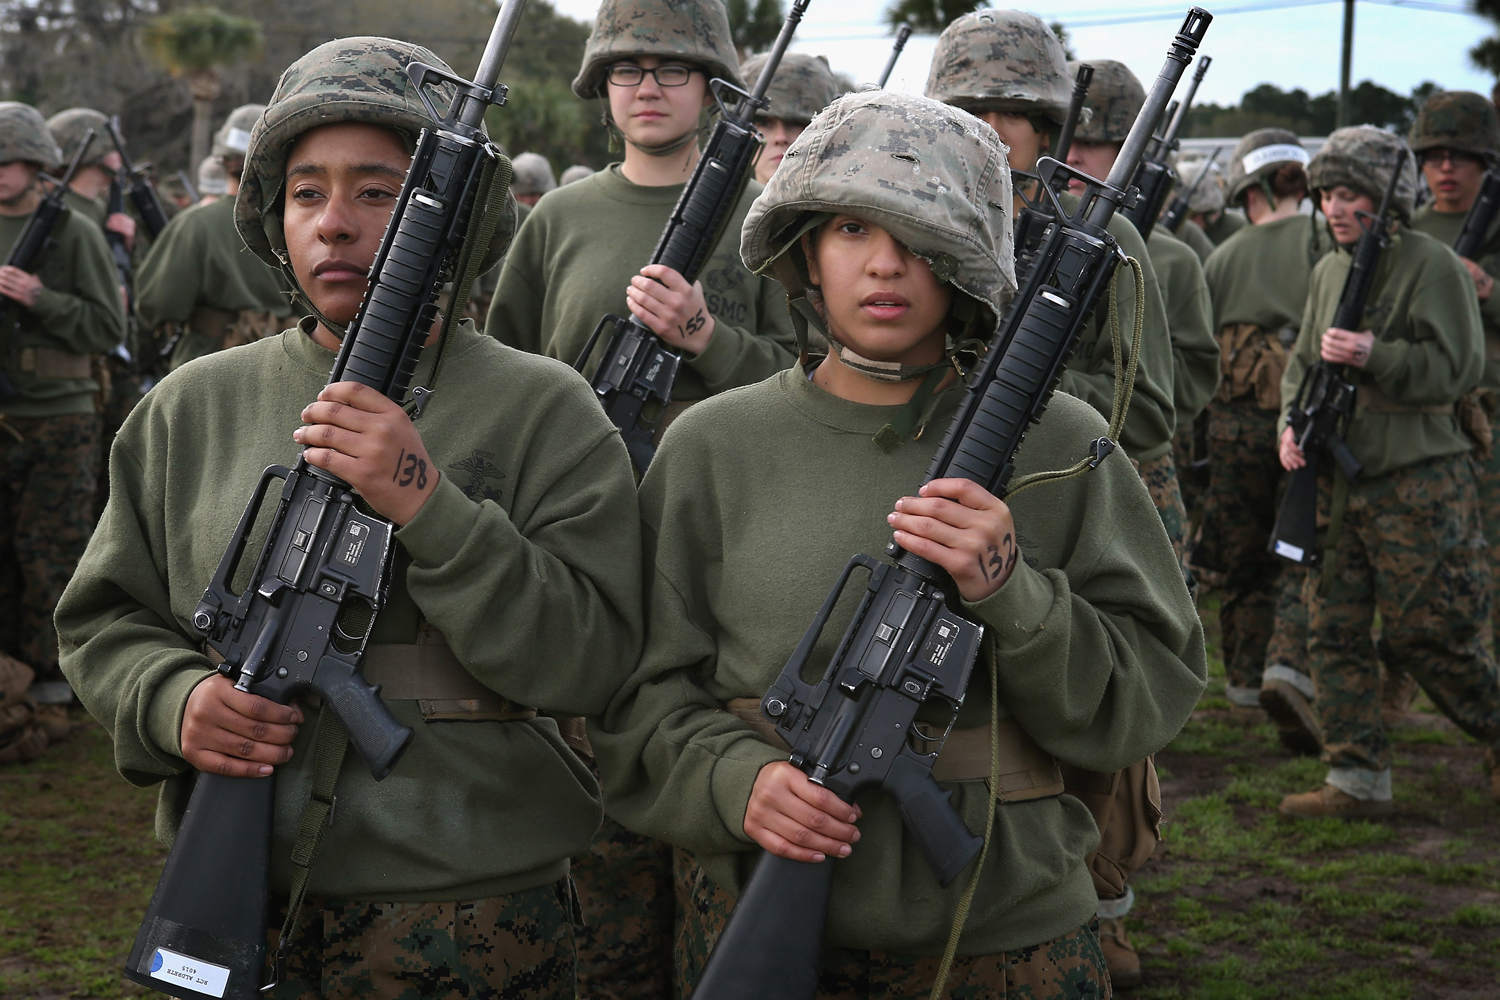 Feb. 27, 2013. Female Marine recruits Princesse Aldrete (L) and Genisis Ordonez (R) stand in formation following hand-to-hand combat training during boot camp at MCRD Parris Island, South Carolina.